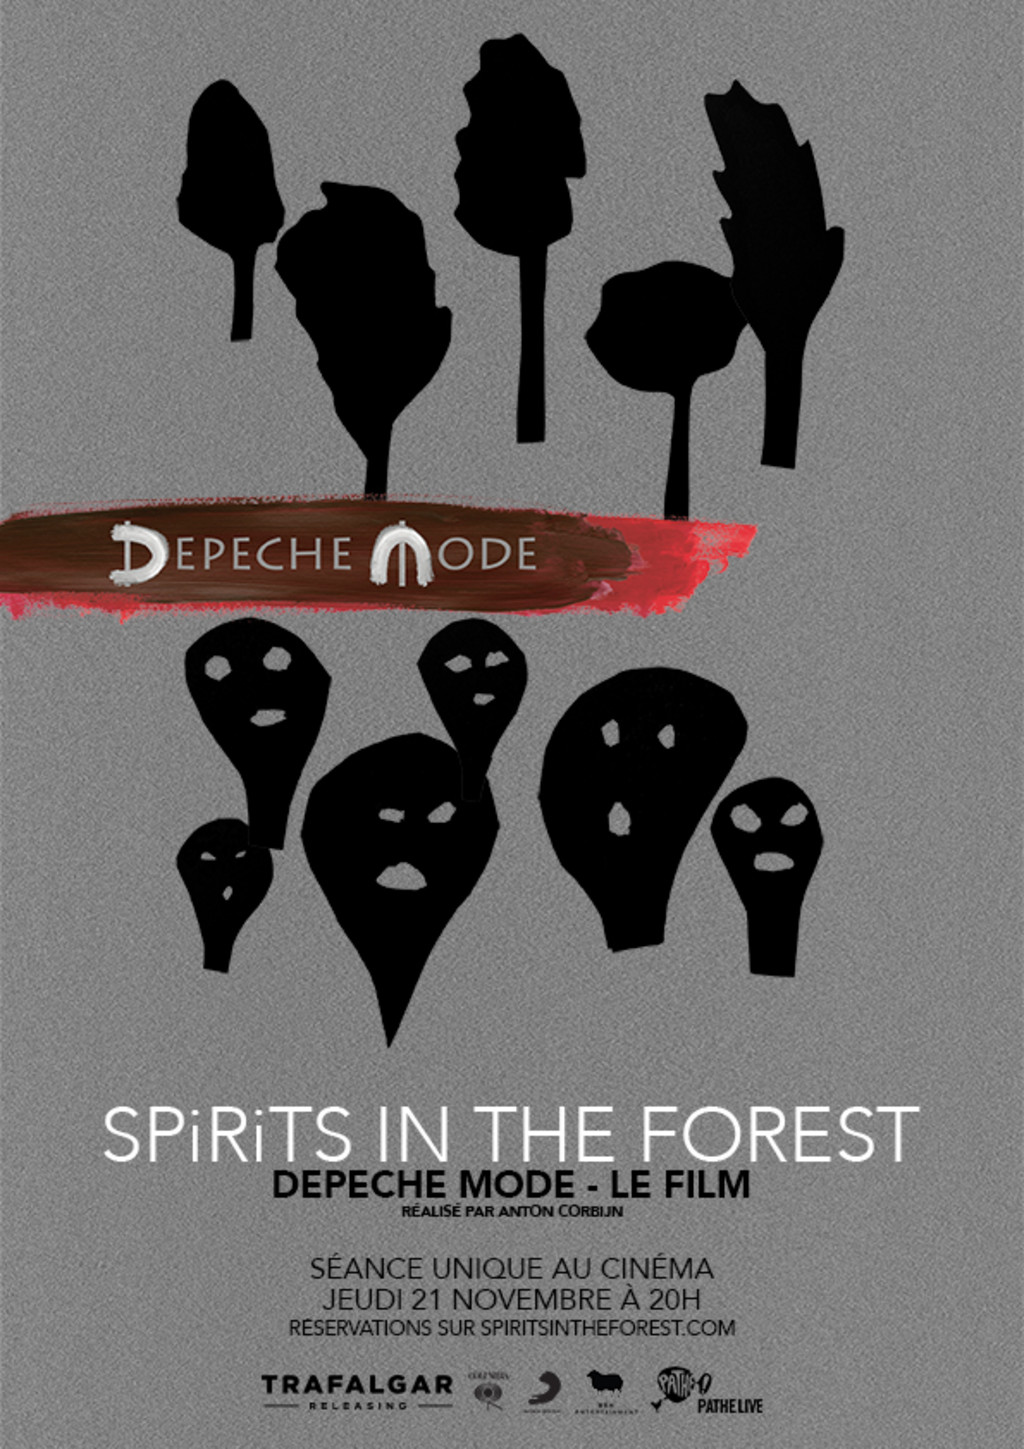 Watch Spirits in the Forest on Netflix Today! | NetflixMovies.com